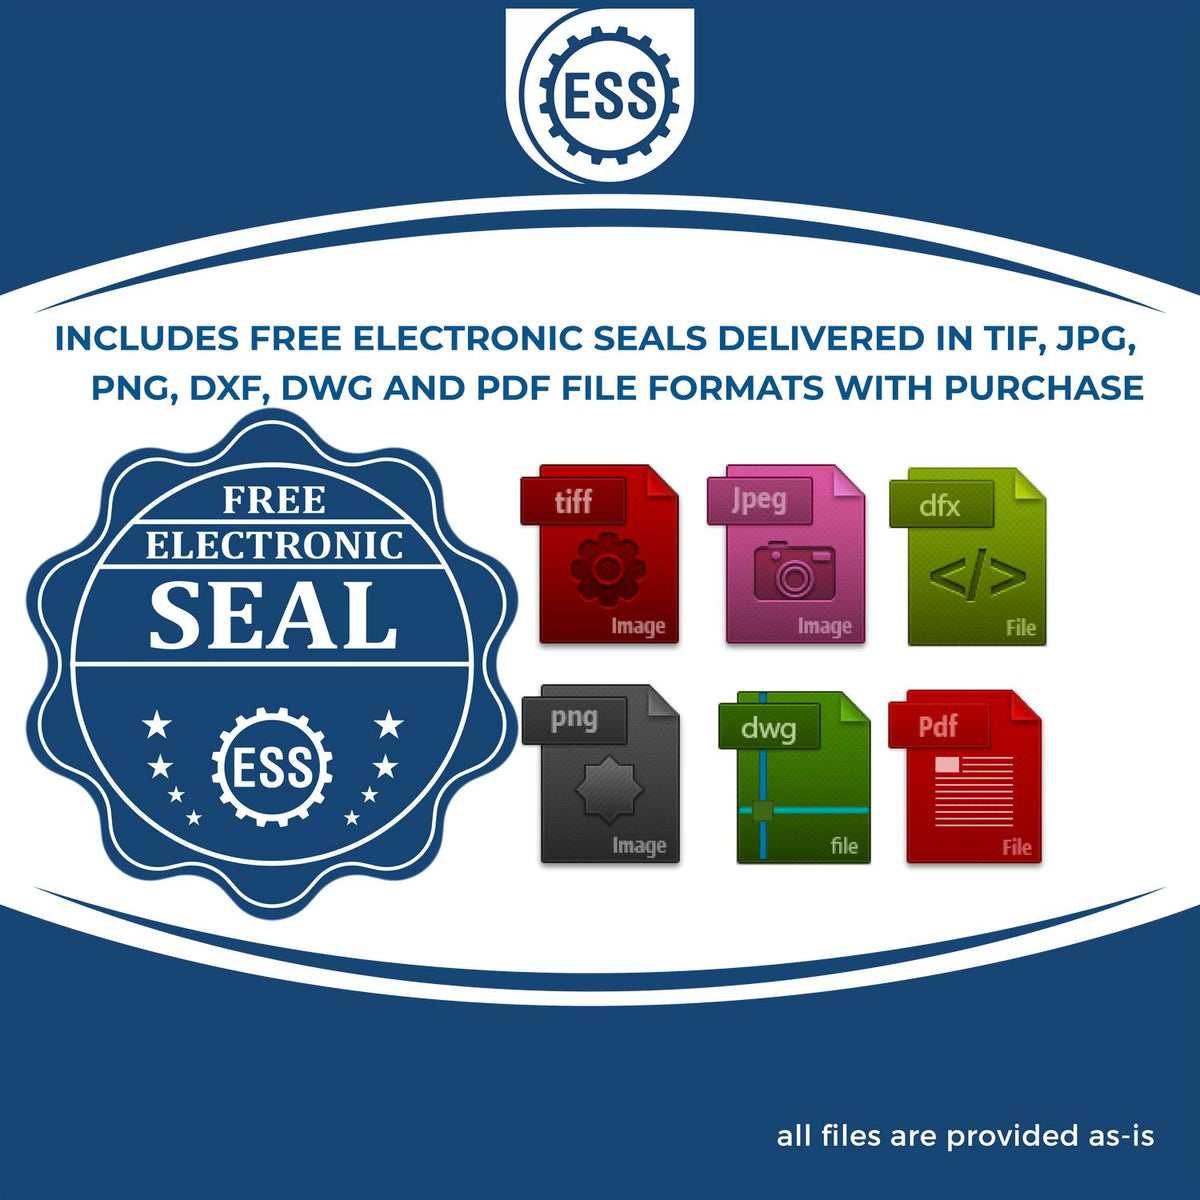 An infographic for the free electronic seal for the Indiana Professional Geologist Seal Stamp illustrating the different file type icons such as DXF, DWG, TIF, JPG and PNG.